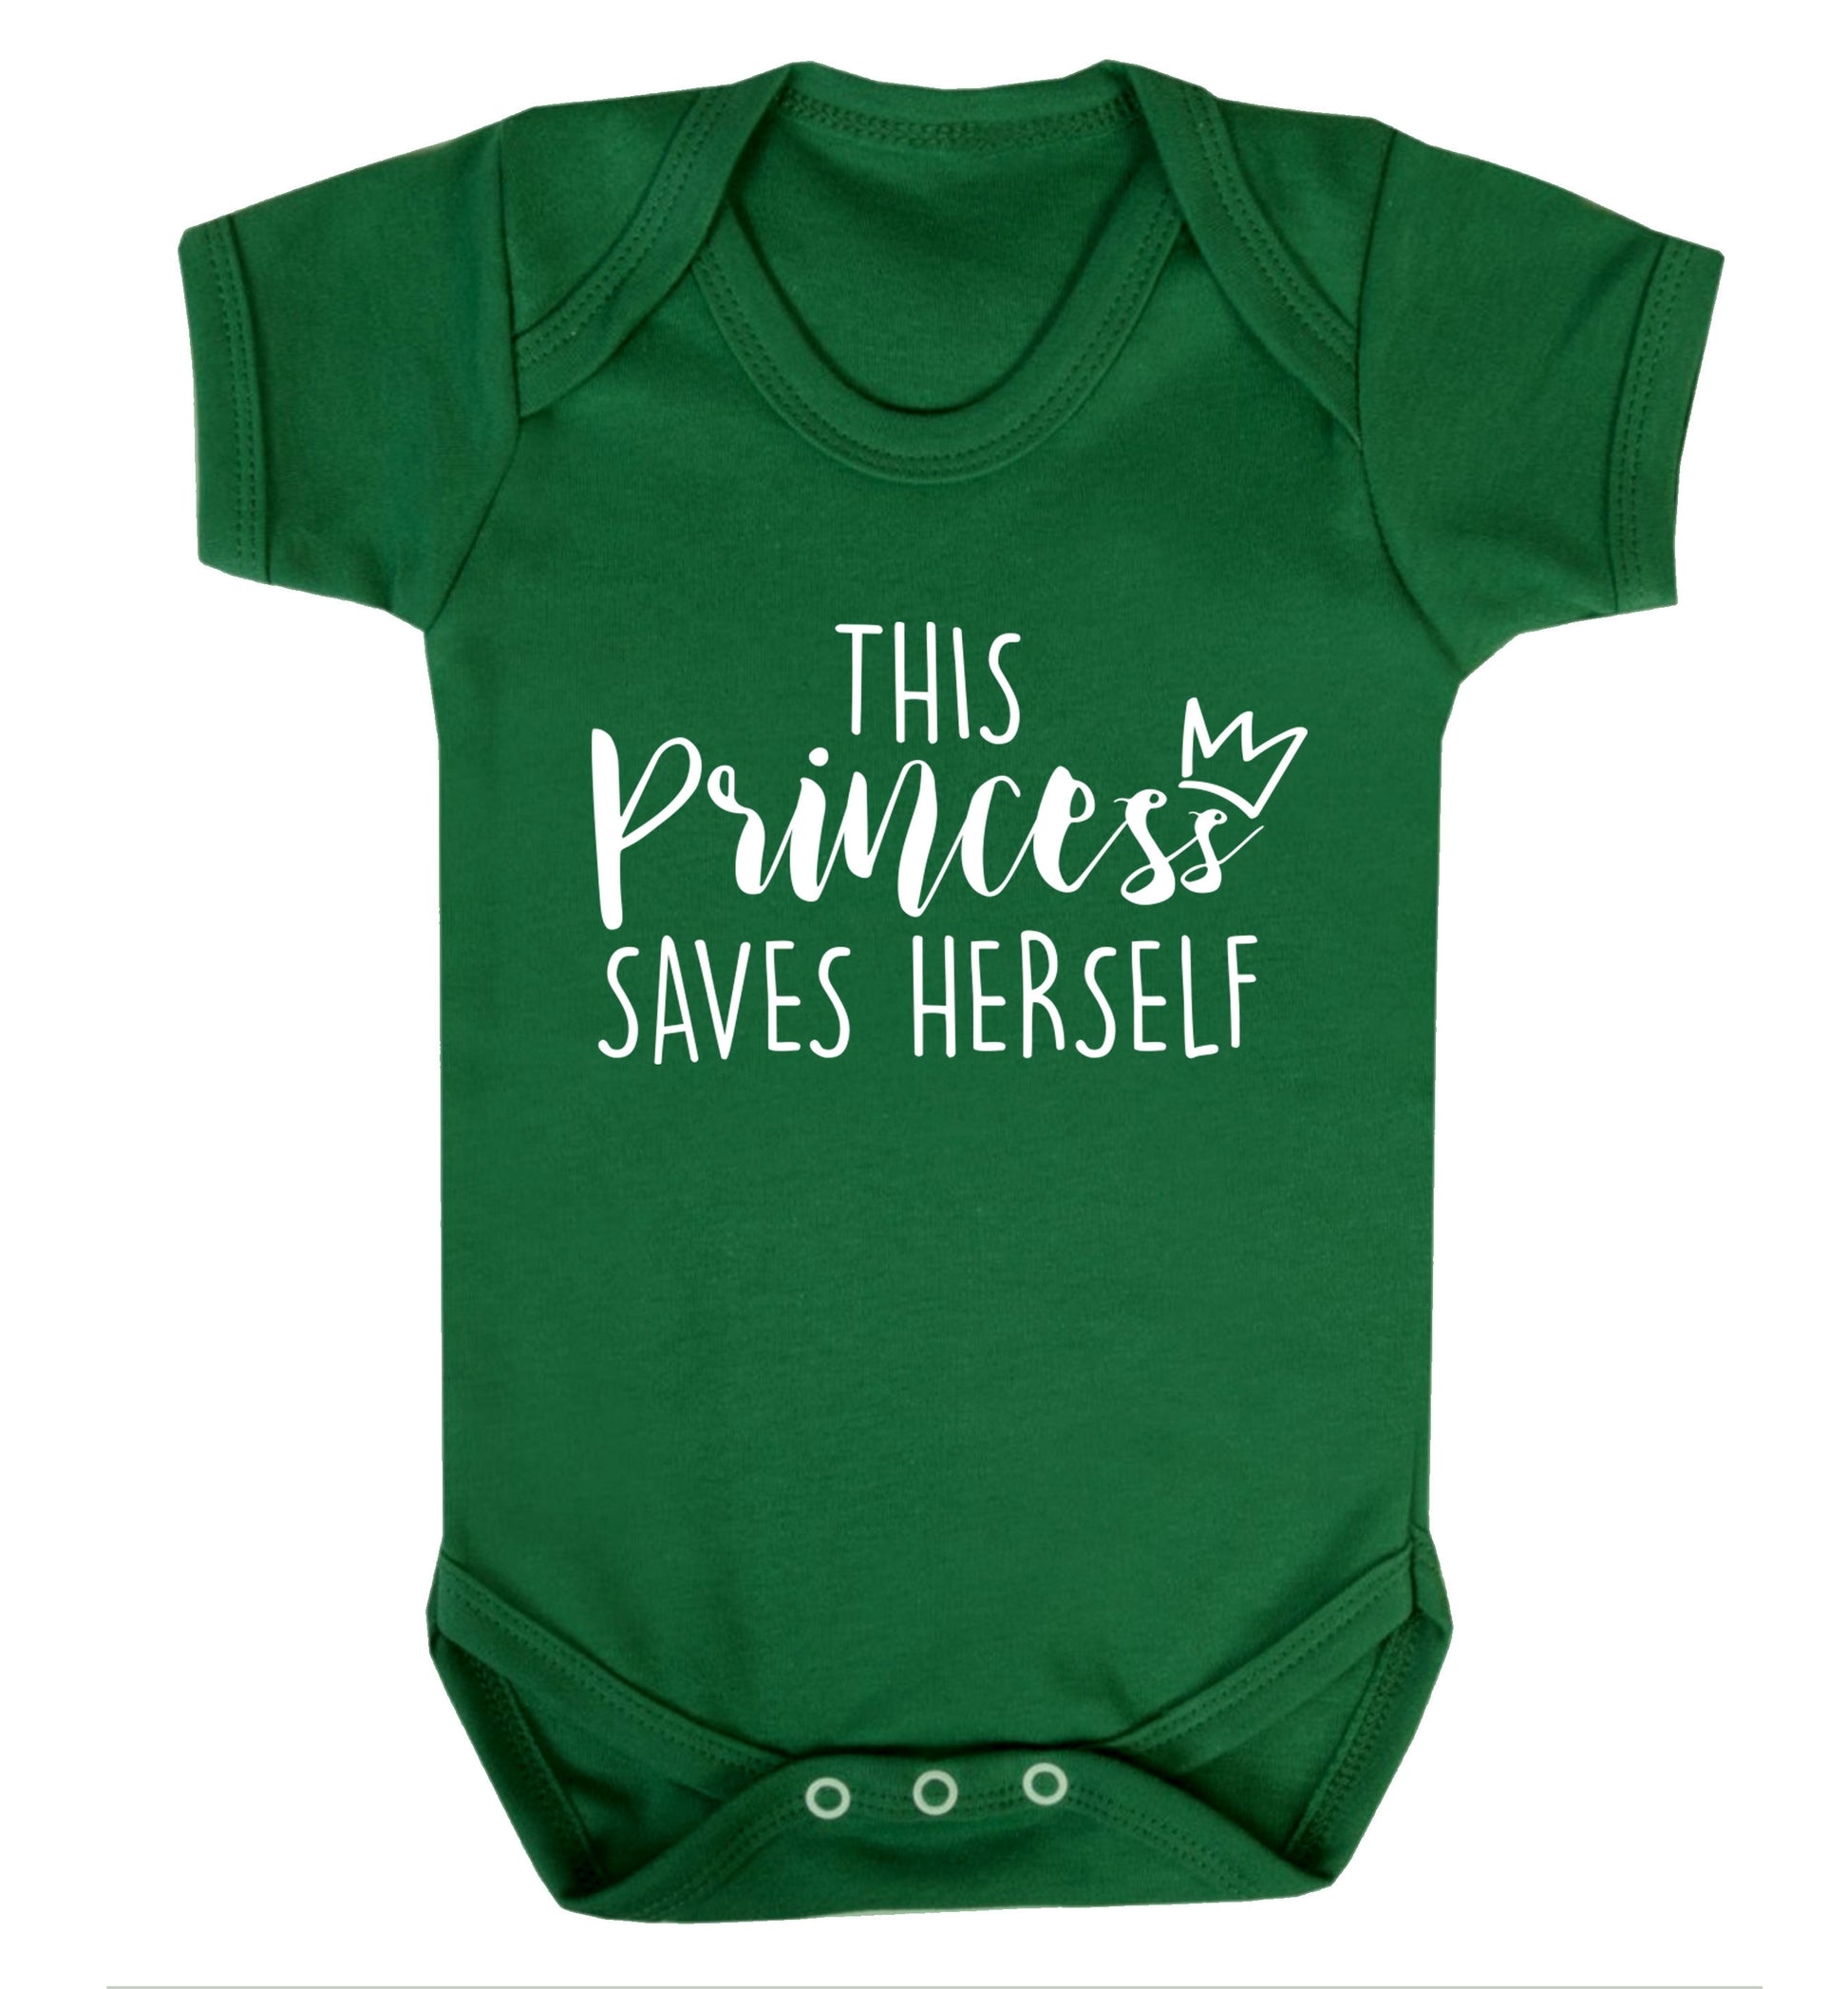 This princess saves herself Baby Vest green 18-24 months